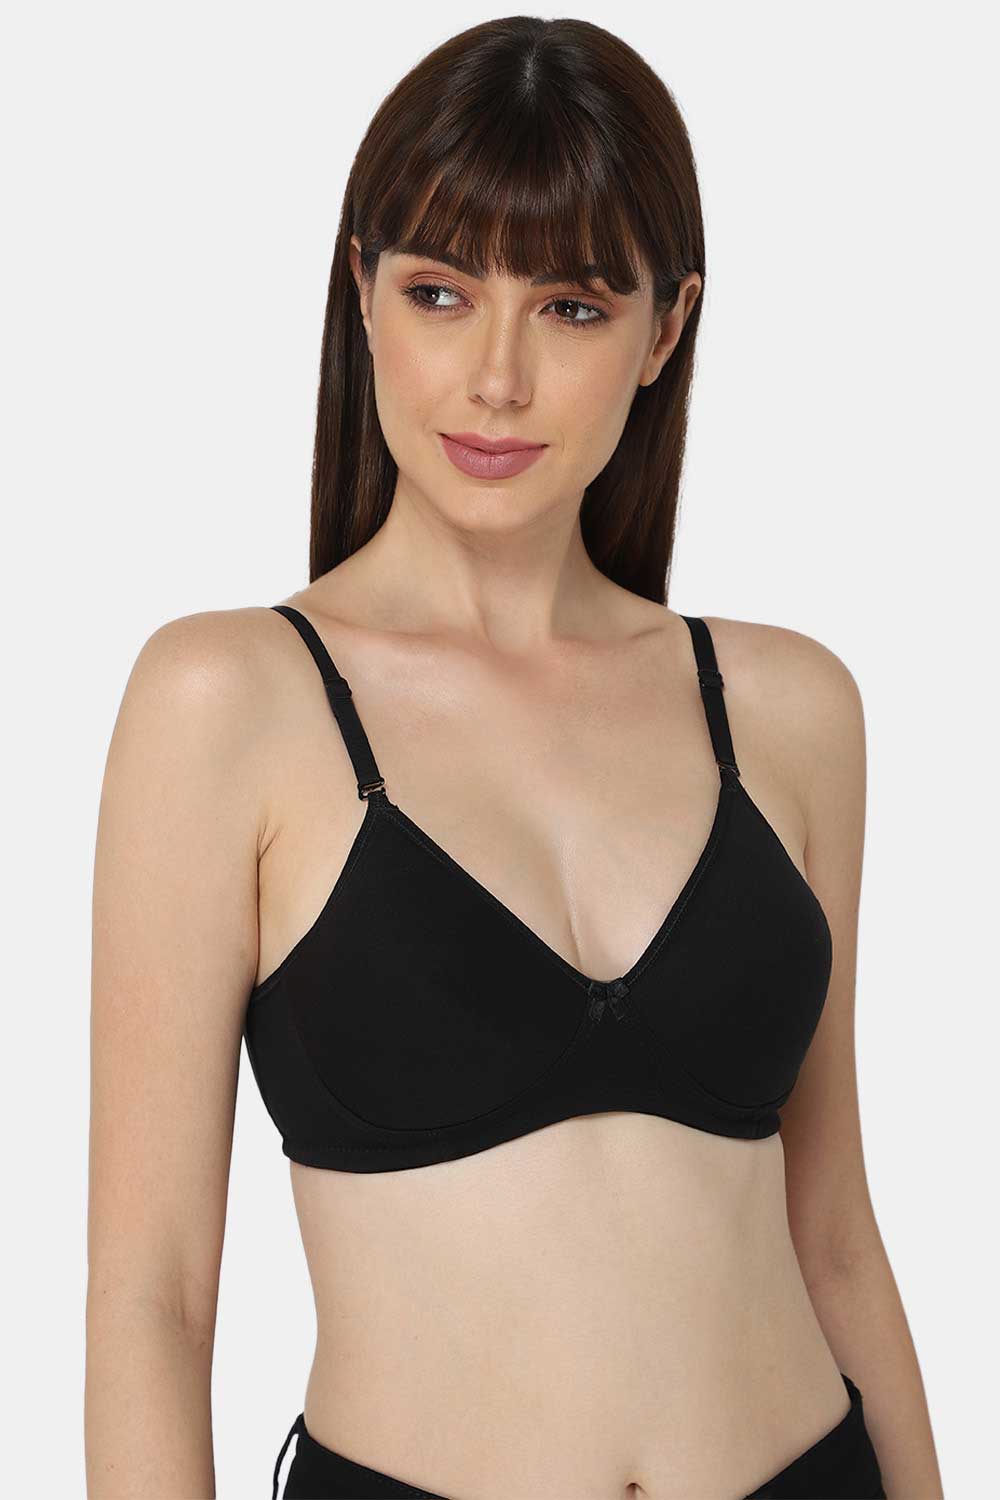 Buy AMANTE Cotton Non-Wired Lightly Padded Women's Beginners Bra